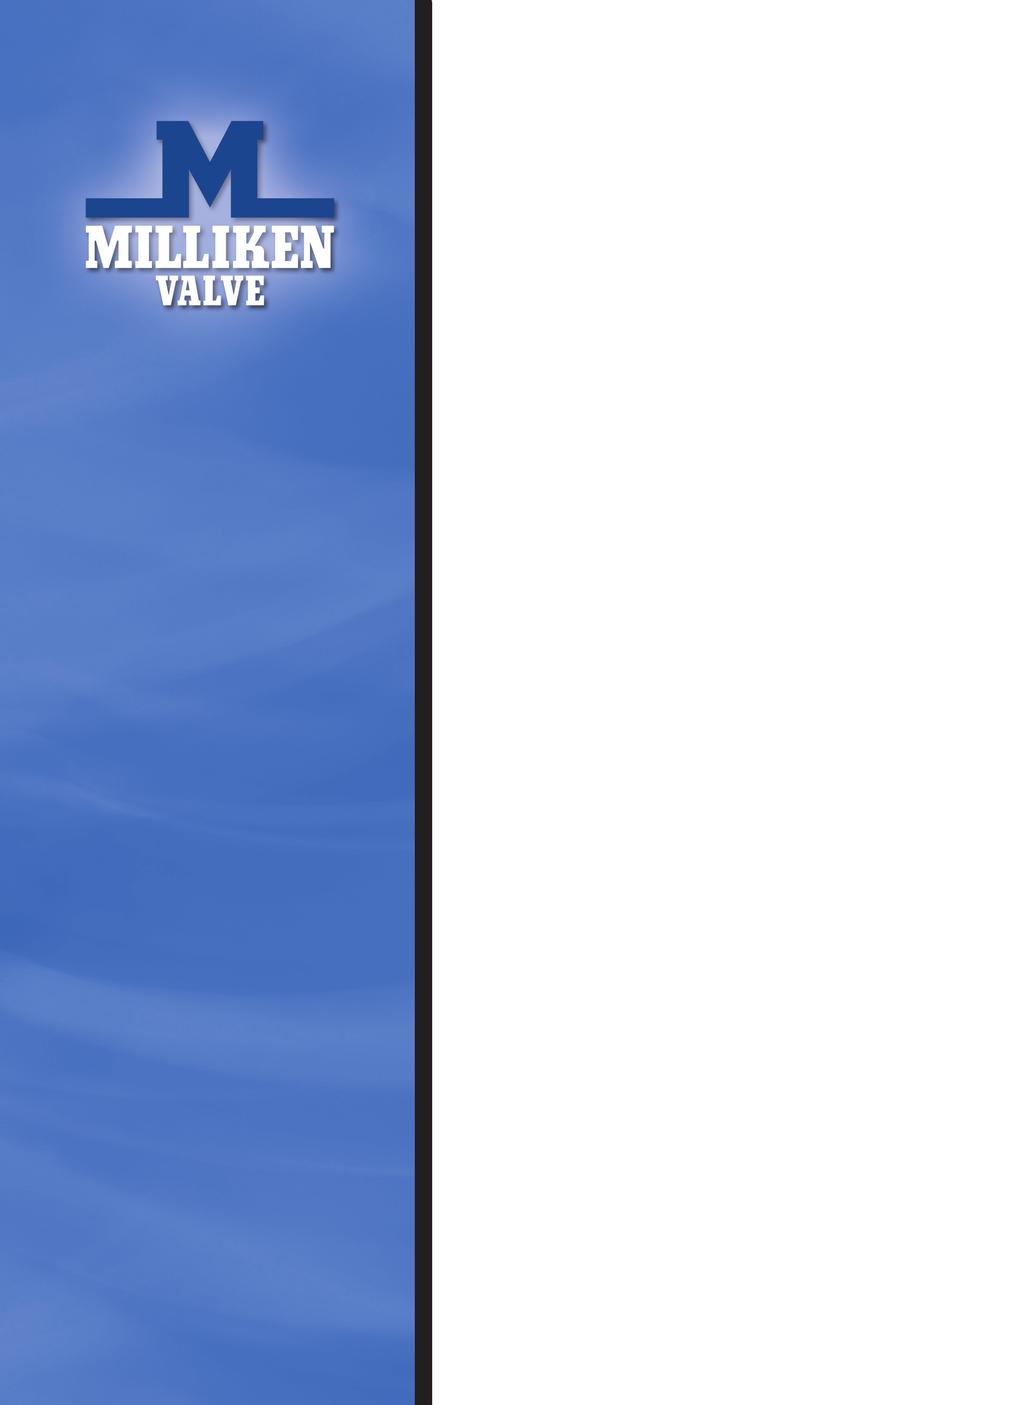 Milliken Valve offers the following for your water and wastewater needs: s Series 601/600 Flanged & MJ Series 601S Stainless Steel Series 601RL Rubber Lined Series 602 High Pressure Series 613A